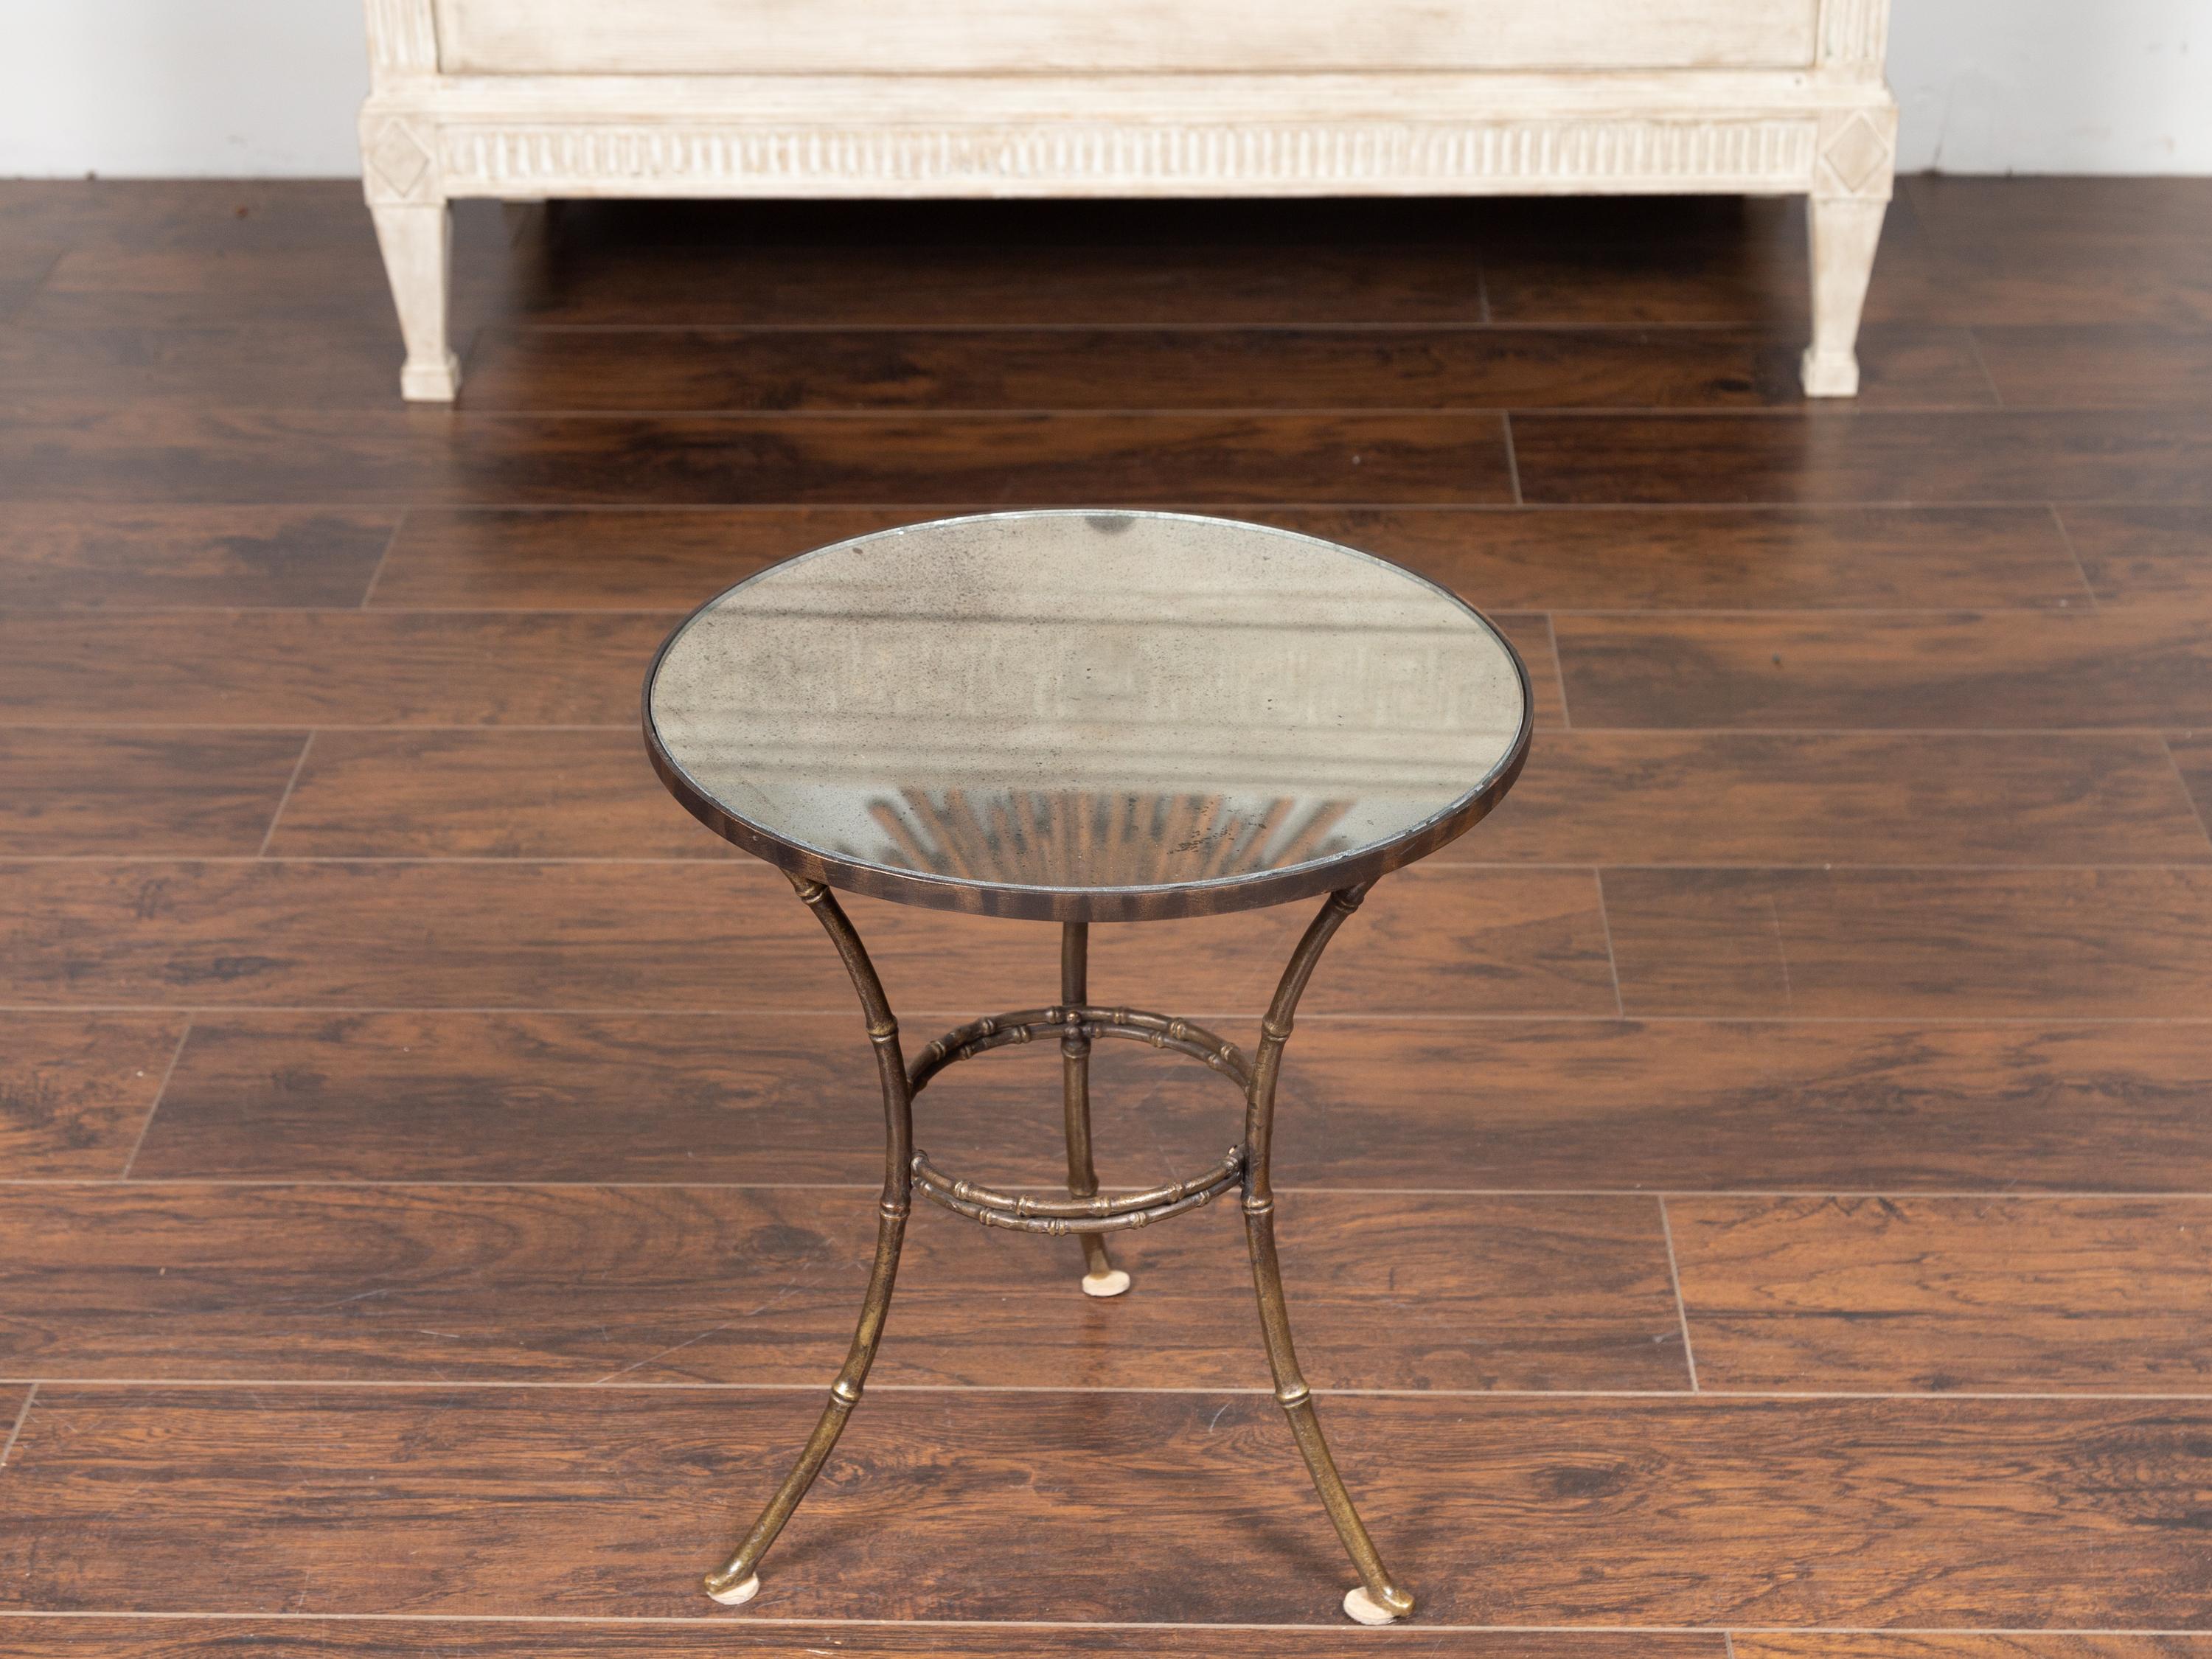 A French brass faux-bamboo style side table from the mid-20th century, with mirrored top. Born in France during the midcentury period, this lovely side table features a circular mirrored top with medium antiquing, sitting above a stylish brass